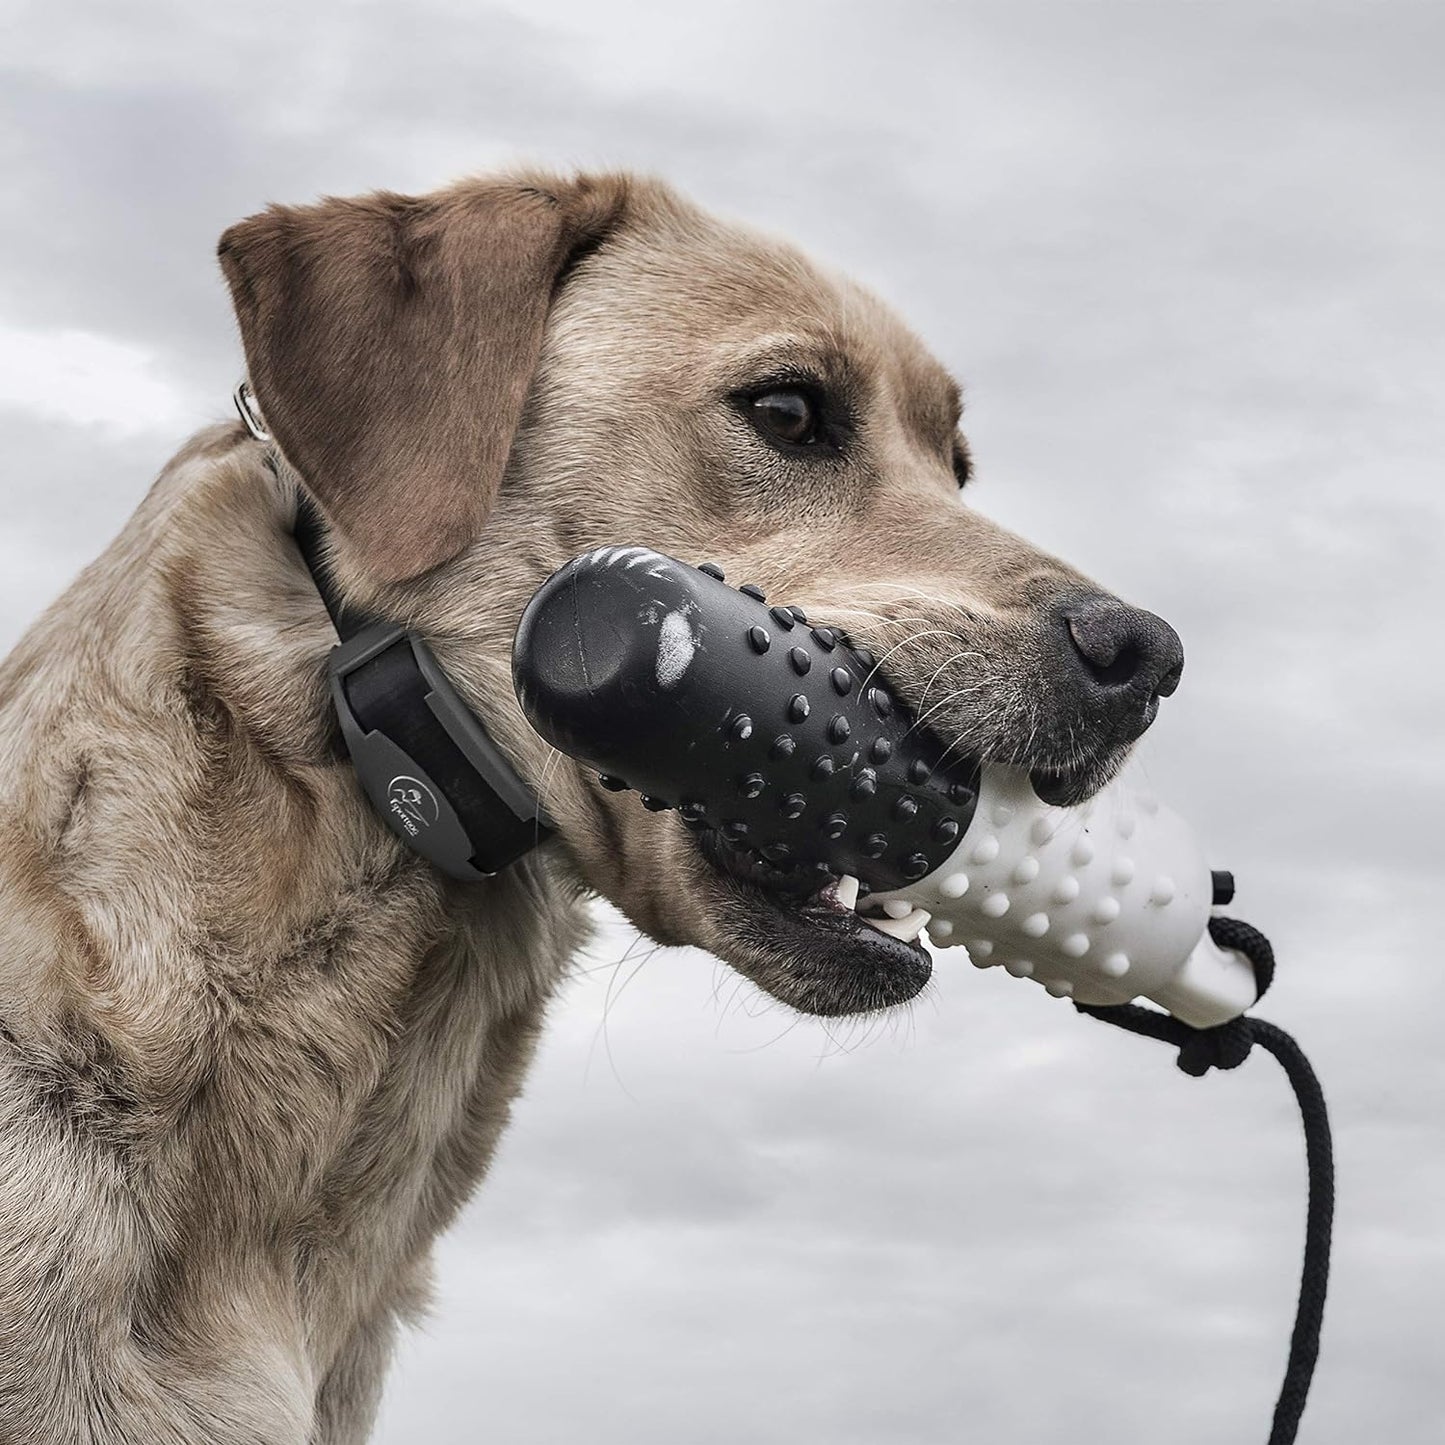 SportDOG Brand FieldTrainer 425X/SportHunter 825 Shock Collar - Additional, Replacement, or Extra Collar for Your Remote Trainer - Waterproof and Rechargeable with Tone, Vibration, and Shock